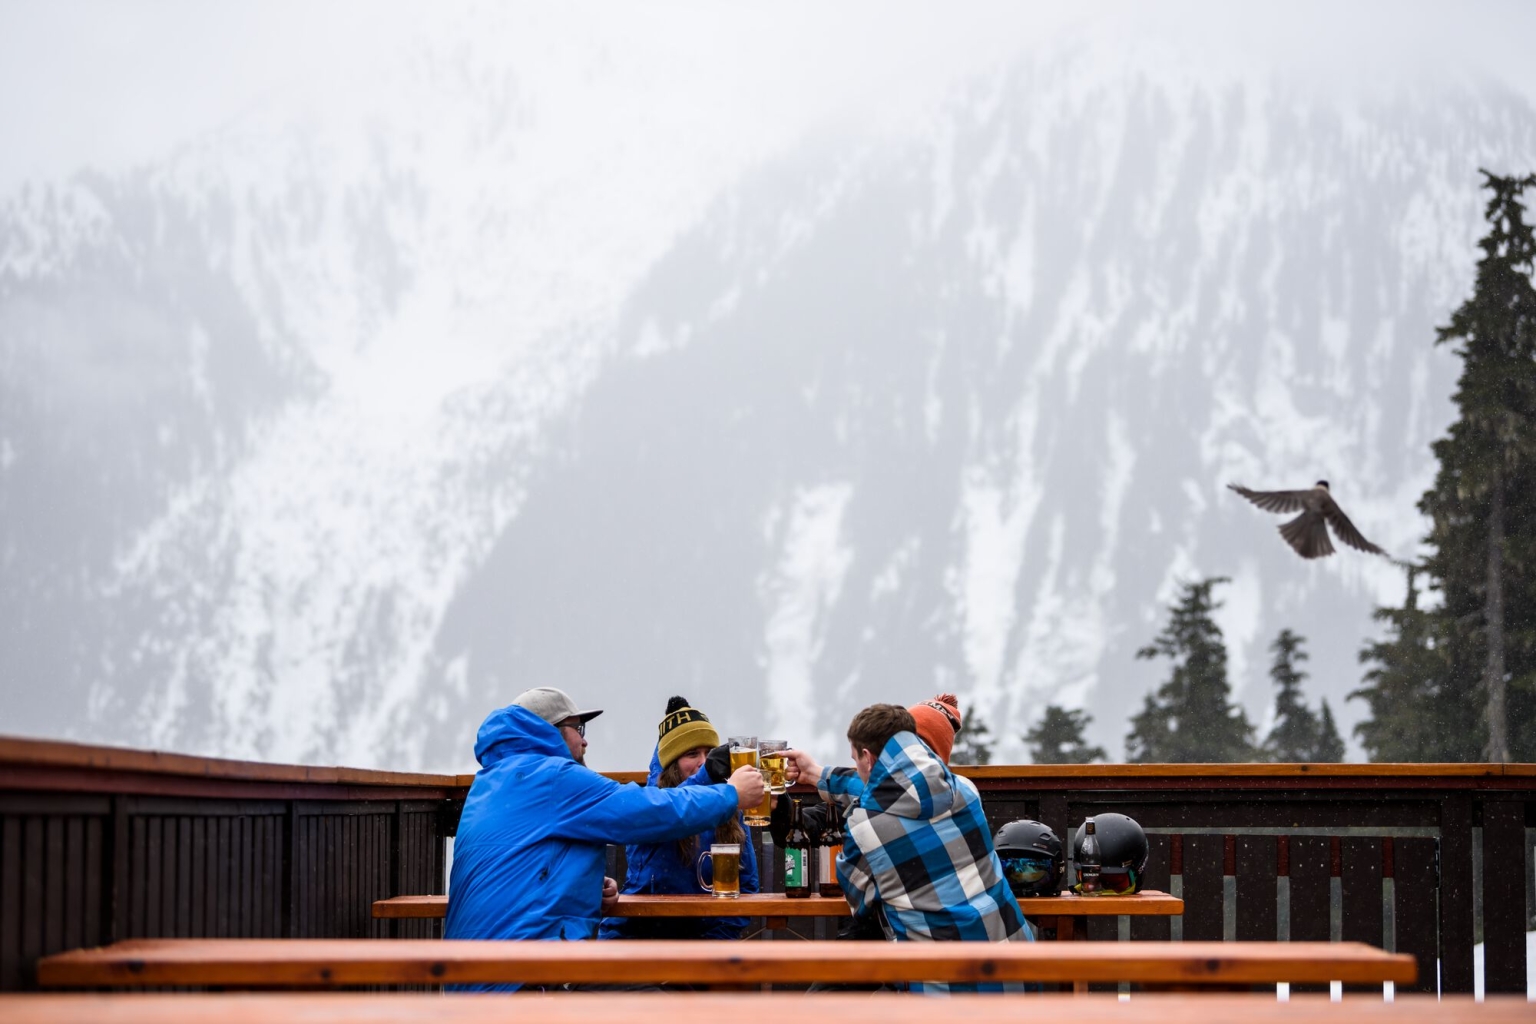 Four people in ski attire sit at a wooden picnic table on an outdoor patio with a snow-covered mountain behind them slightly obscured by fog. The four are clinking beer glasses.